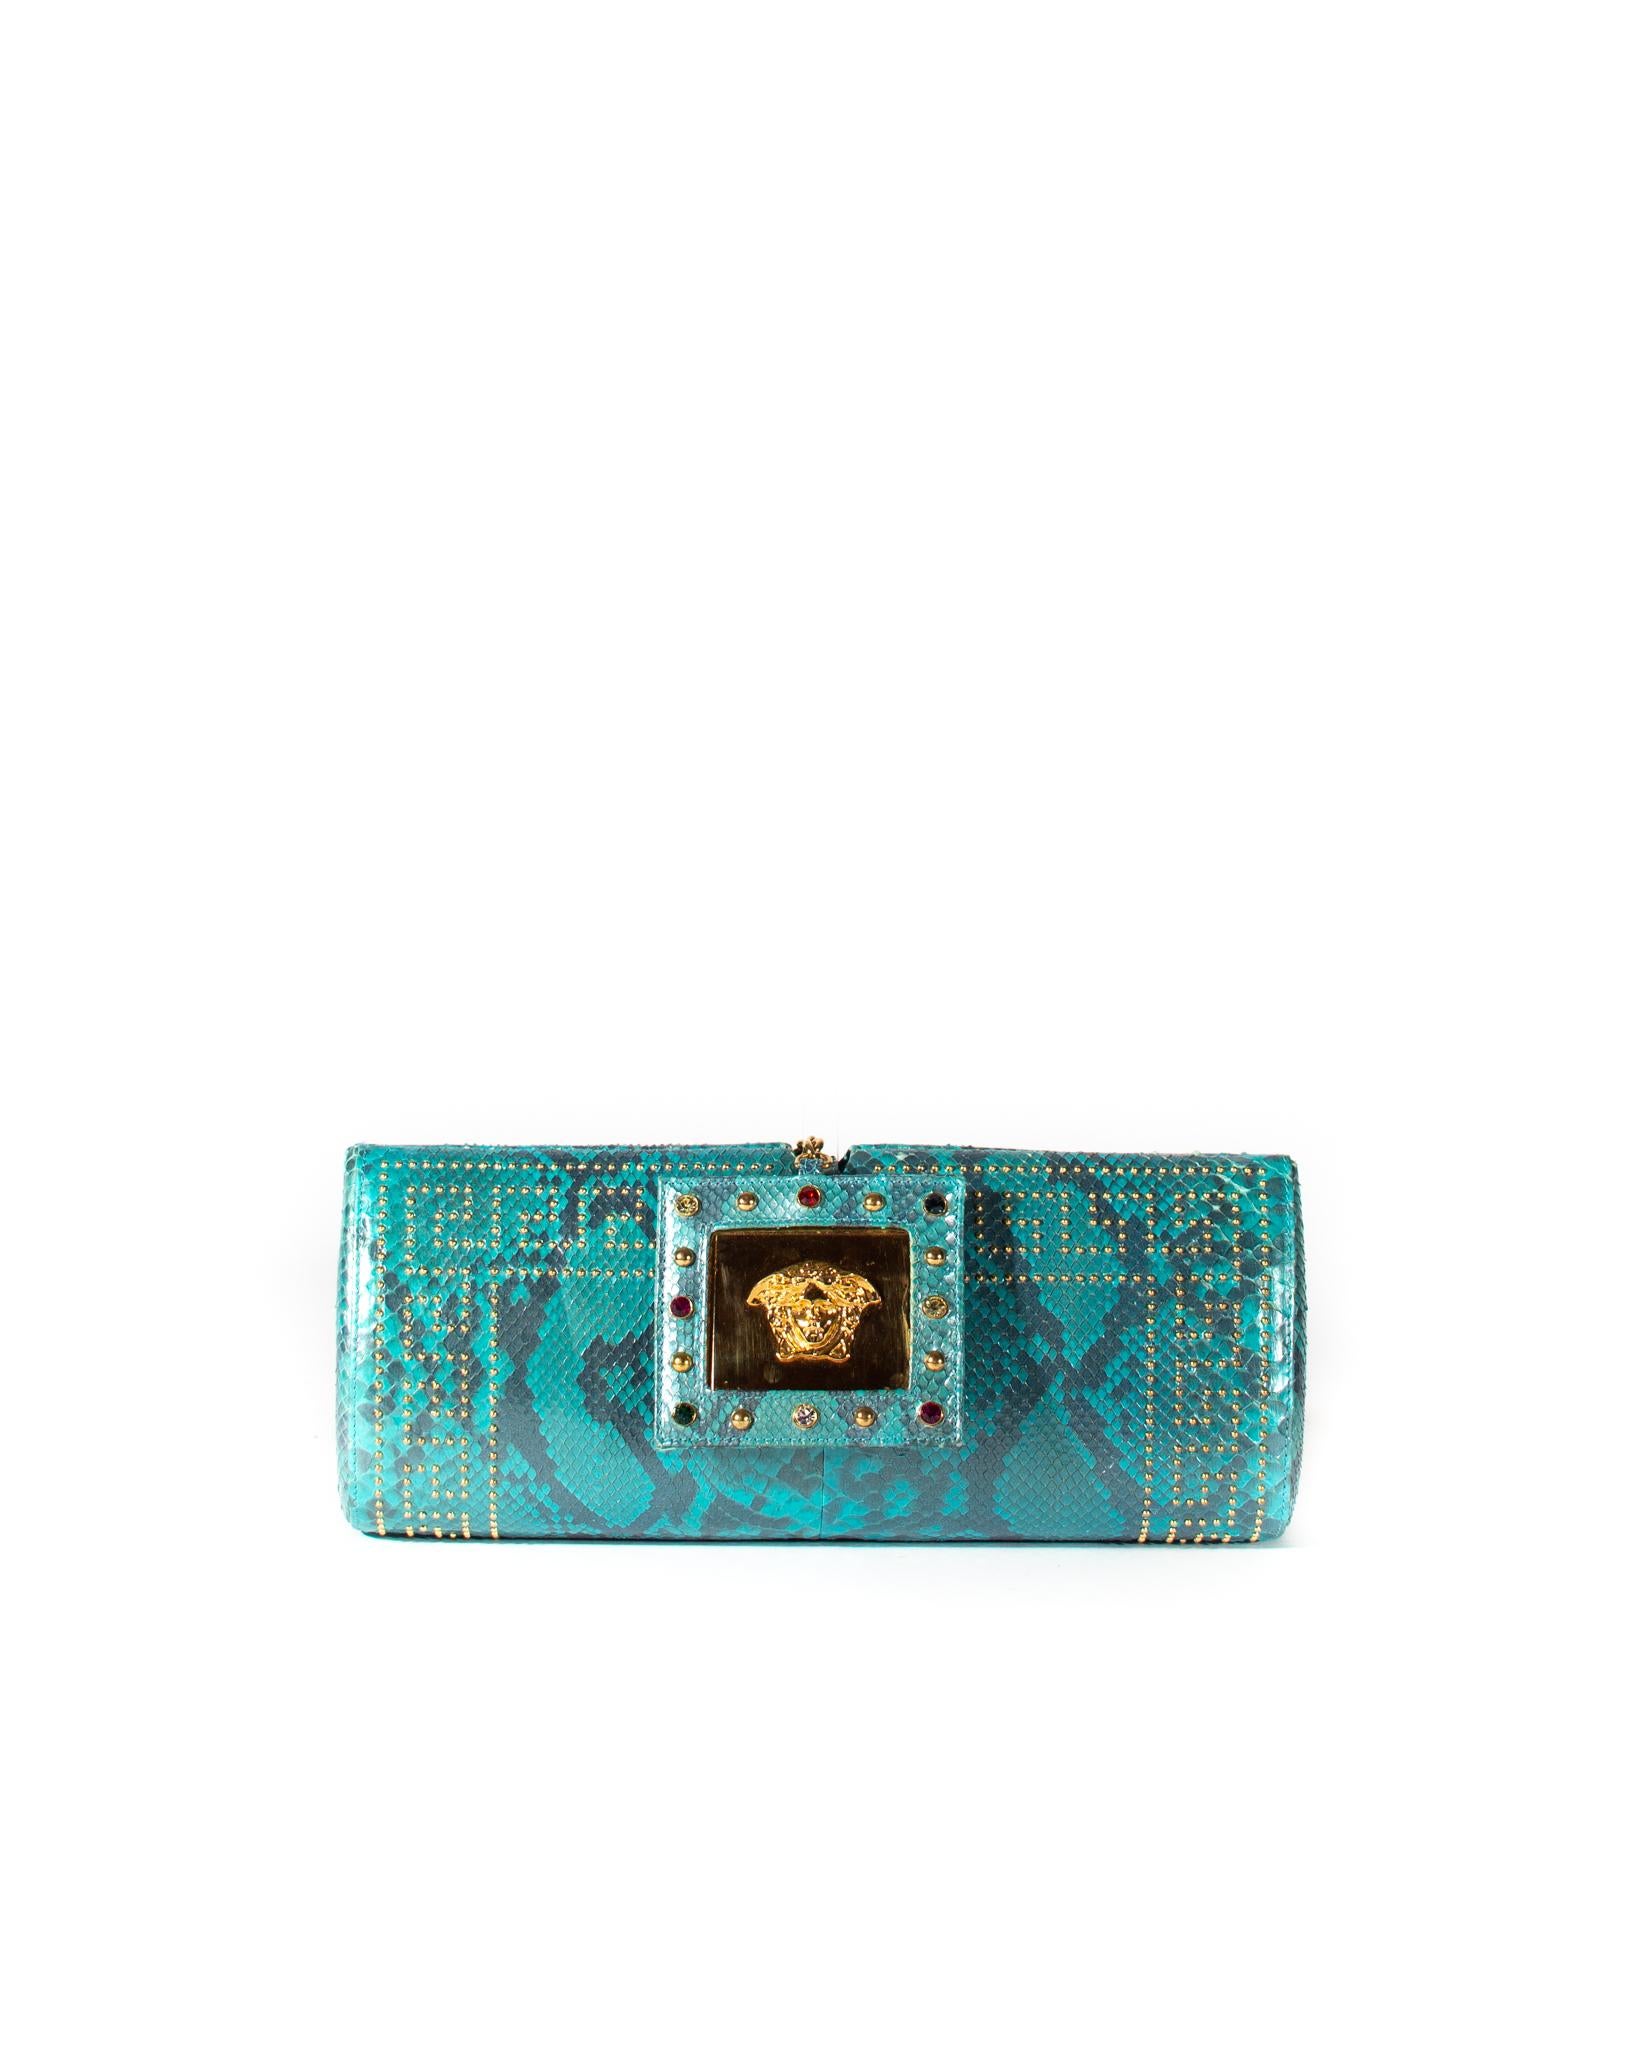 S/S 2000 Gianni Versace Python Blue Convertible Evening Bag & Clutch Donatella In Good Condition For Sale In West Hollywood, CA